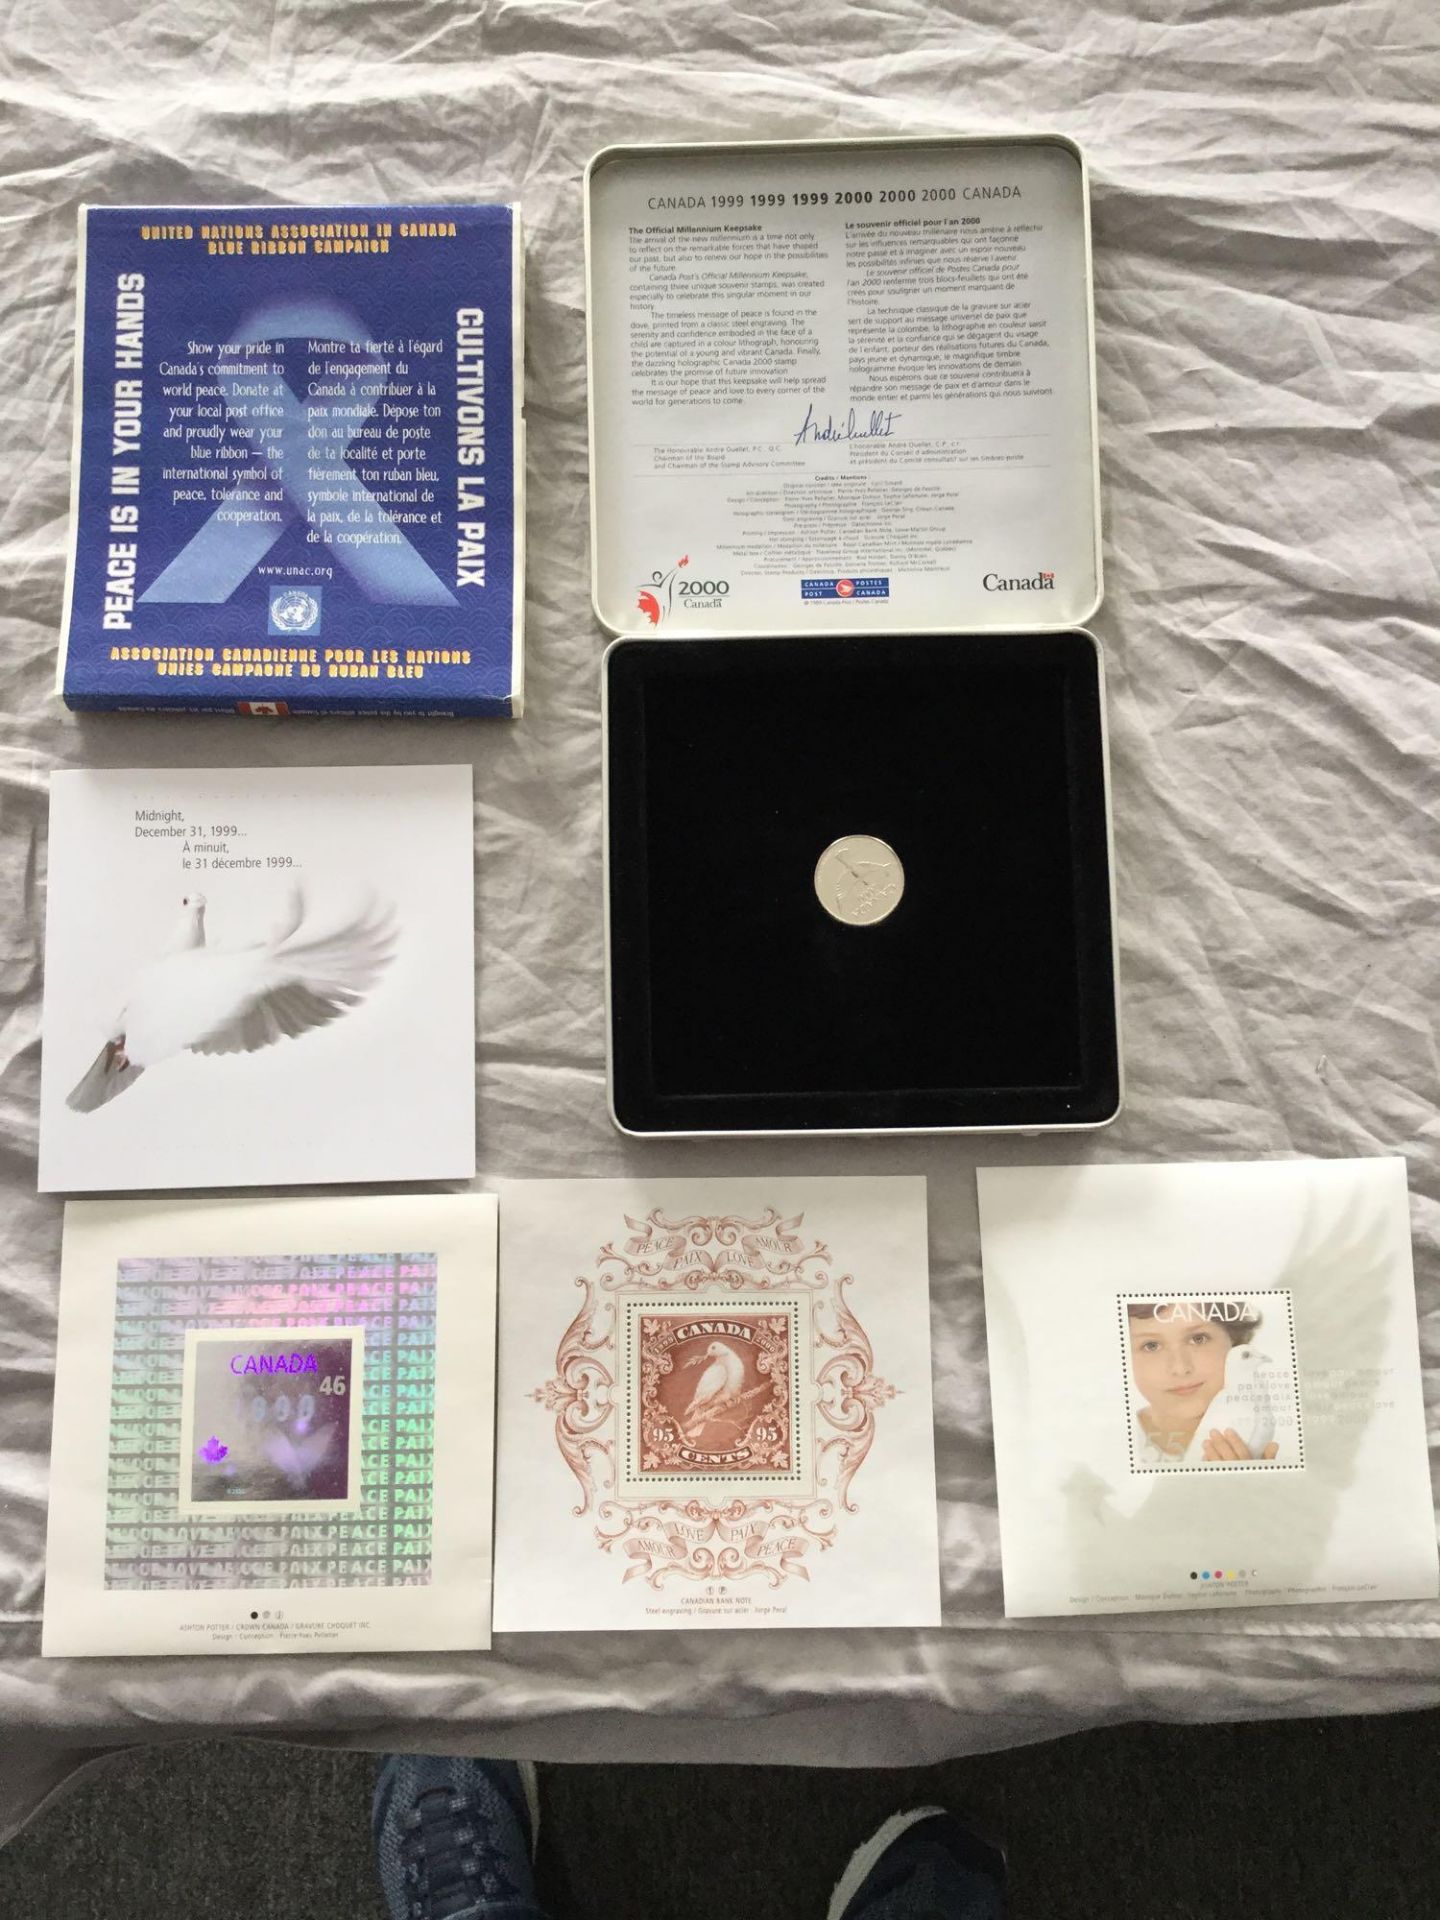 Royal Canadian Mint - 2000 United nations Blue Ribbon Campaign Collectors Stamp and 25 cent coin set - Image 3 of 4